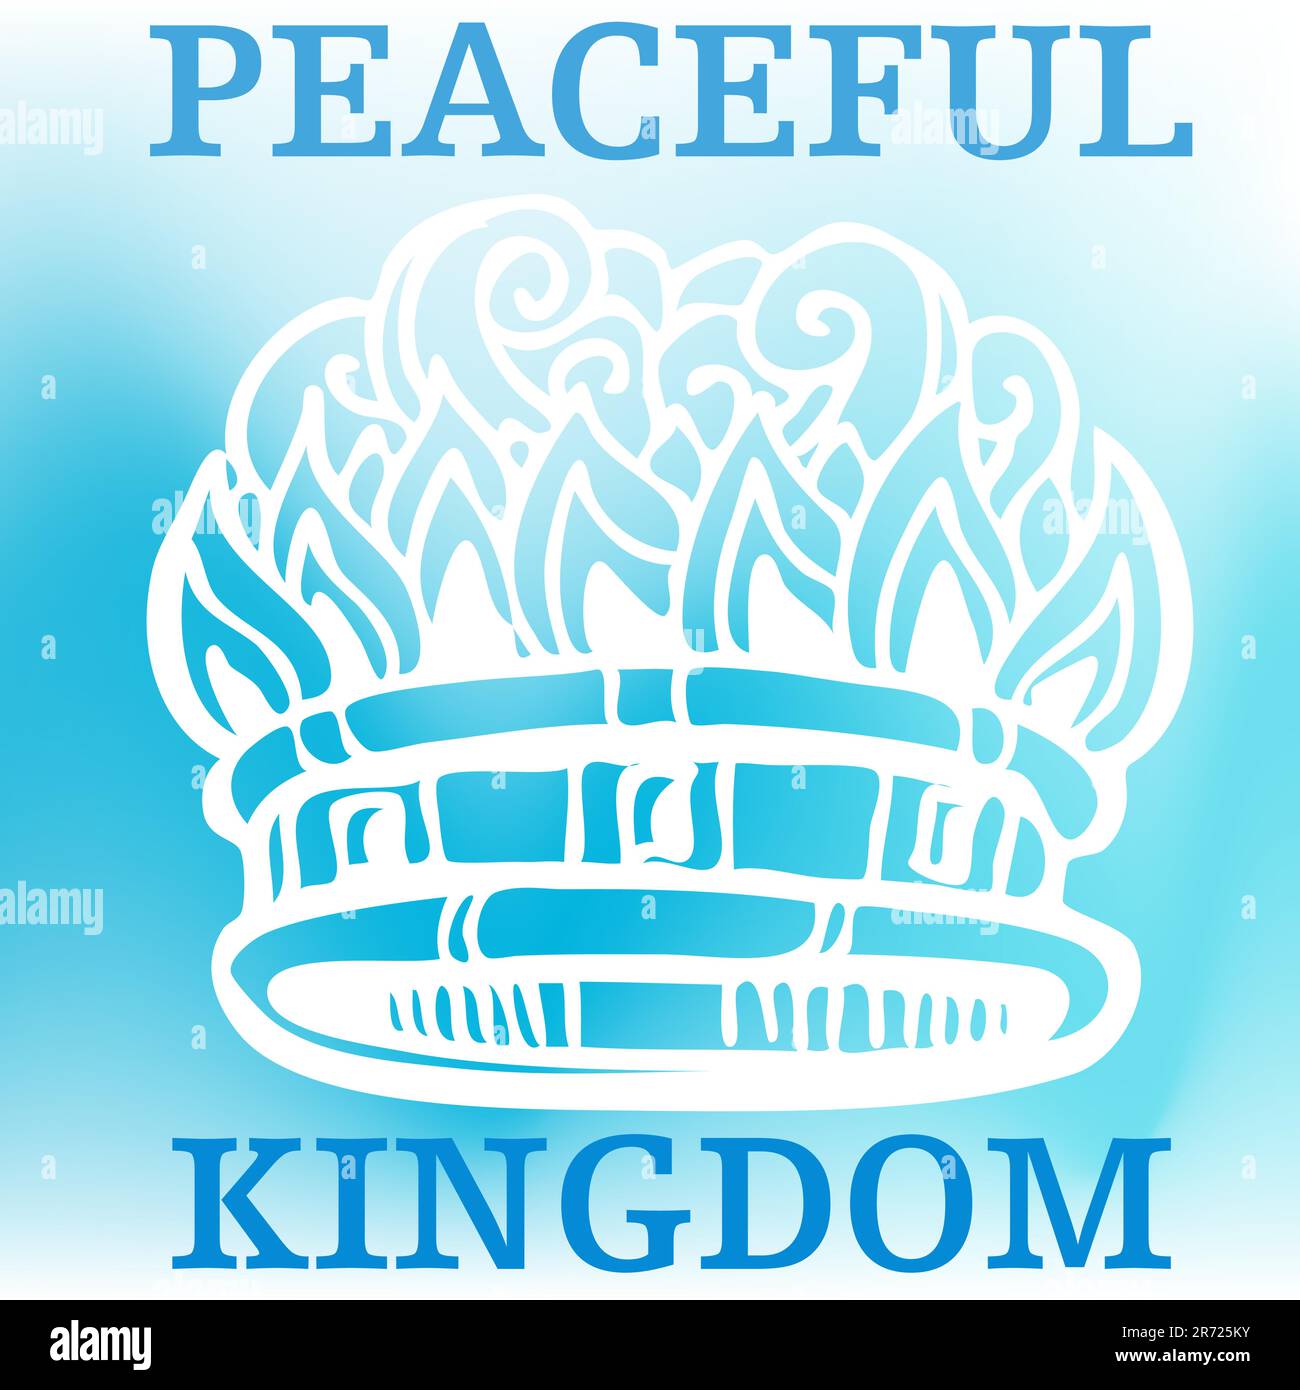 An image representing a peaceful kingdom. Stock Vector